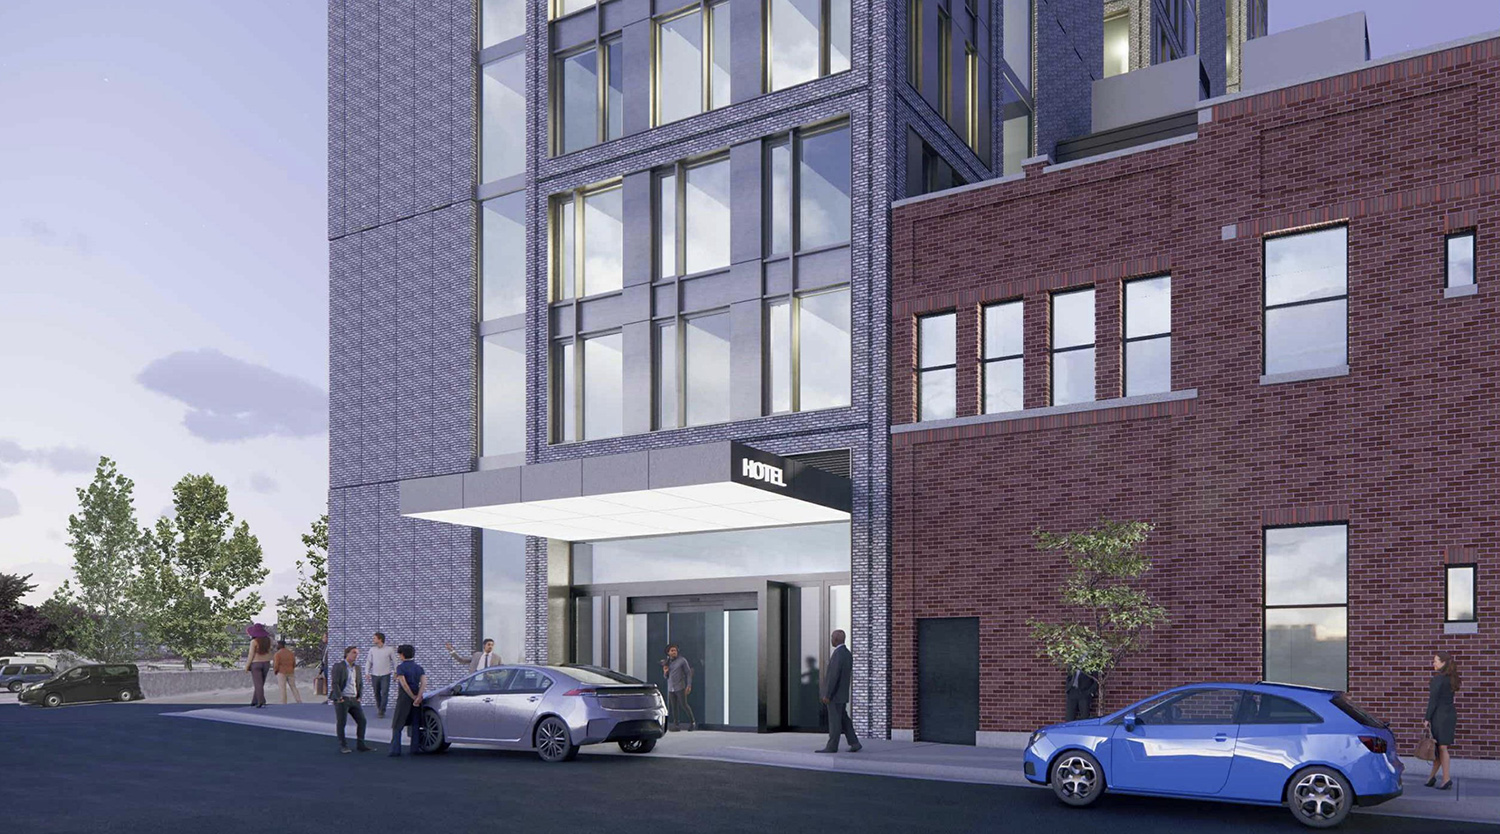 Hotel Entry for 311 N Sangamon Street. Rendering by Hirsch MPG